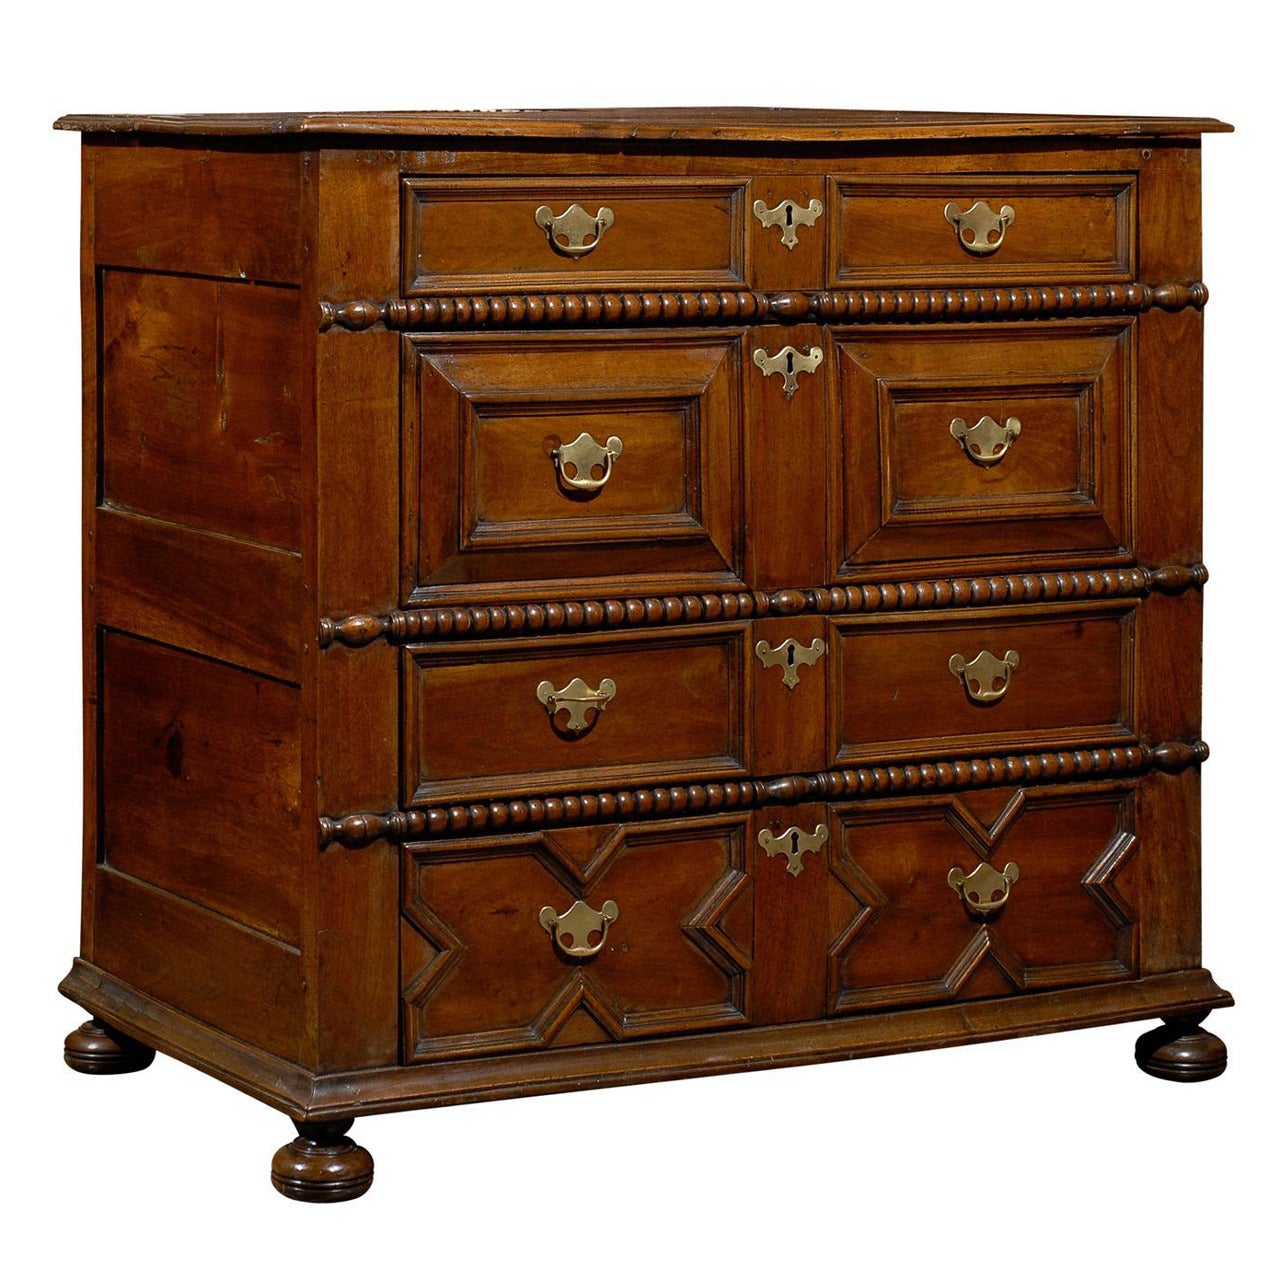 English Walnut Early 19th Century Five-Drawer Chest with Geometric Front